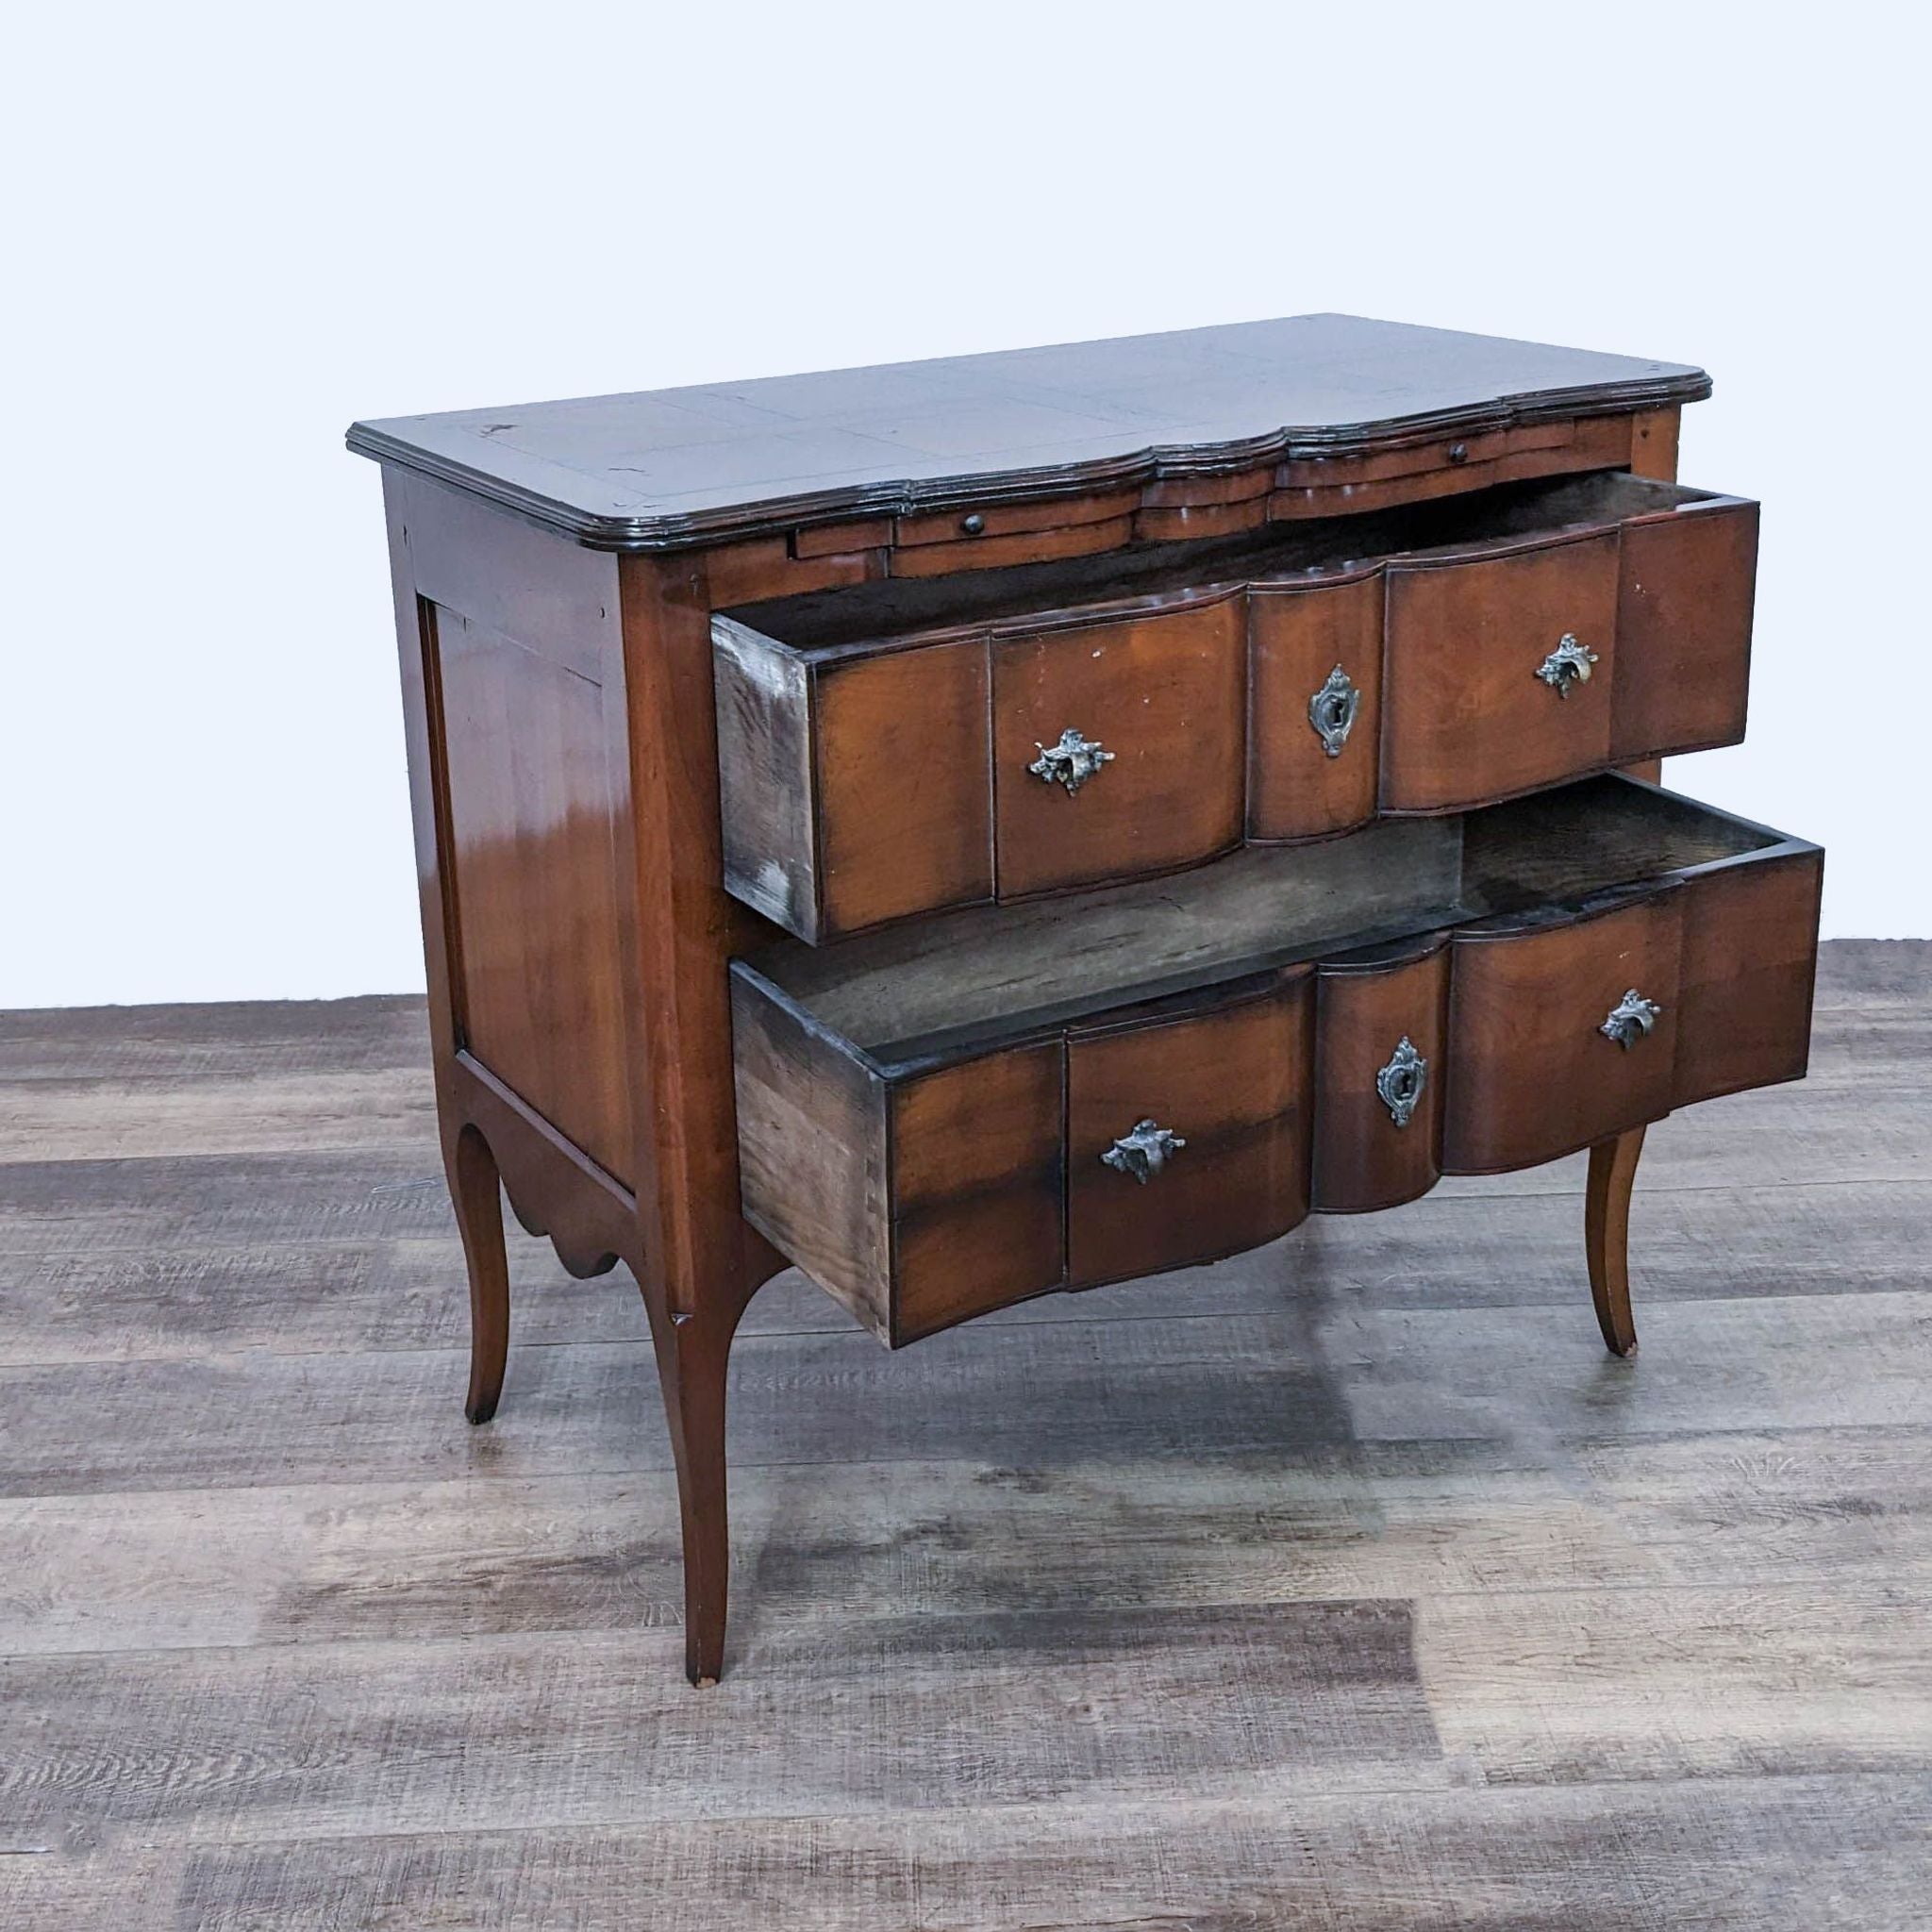 DeBournay dresser with open drawers showcasing dovetail joinery and curved front, set on elegant curved legs.